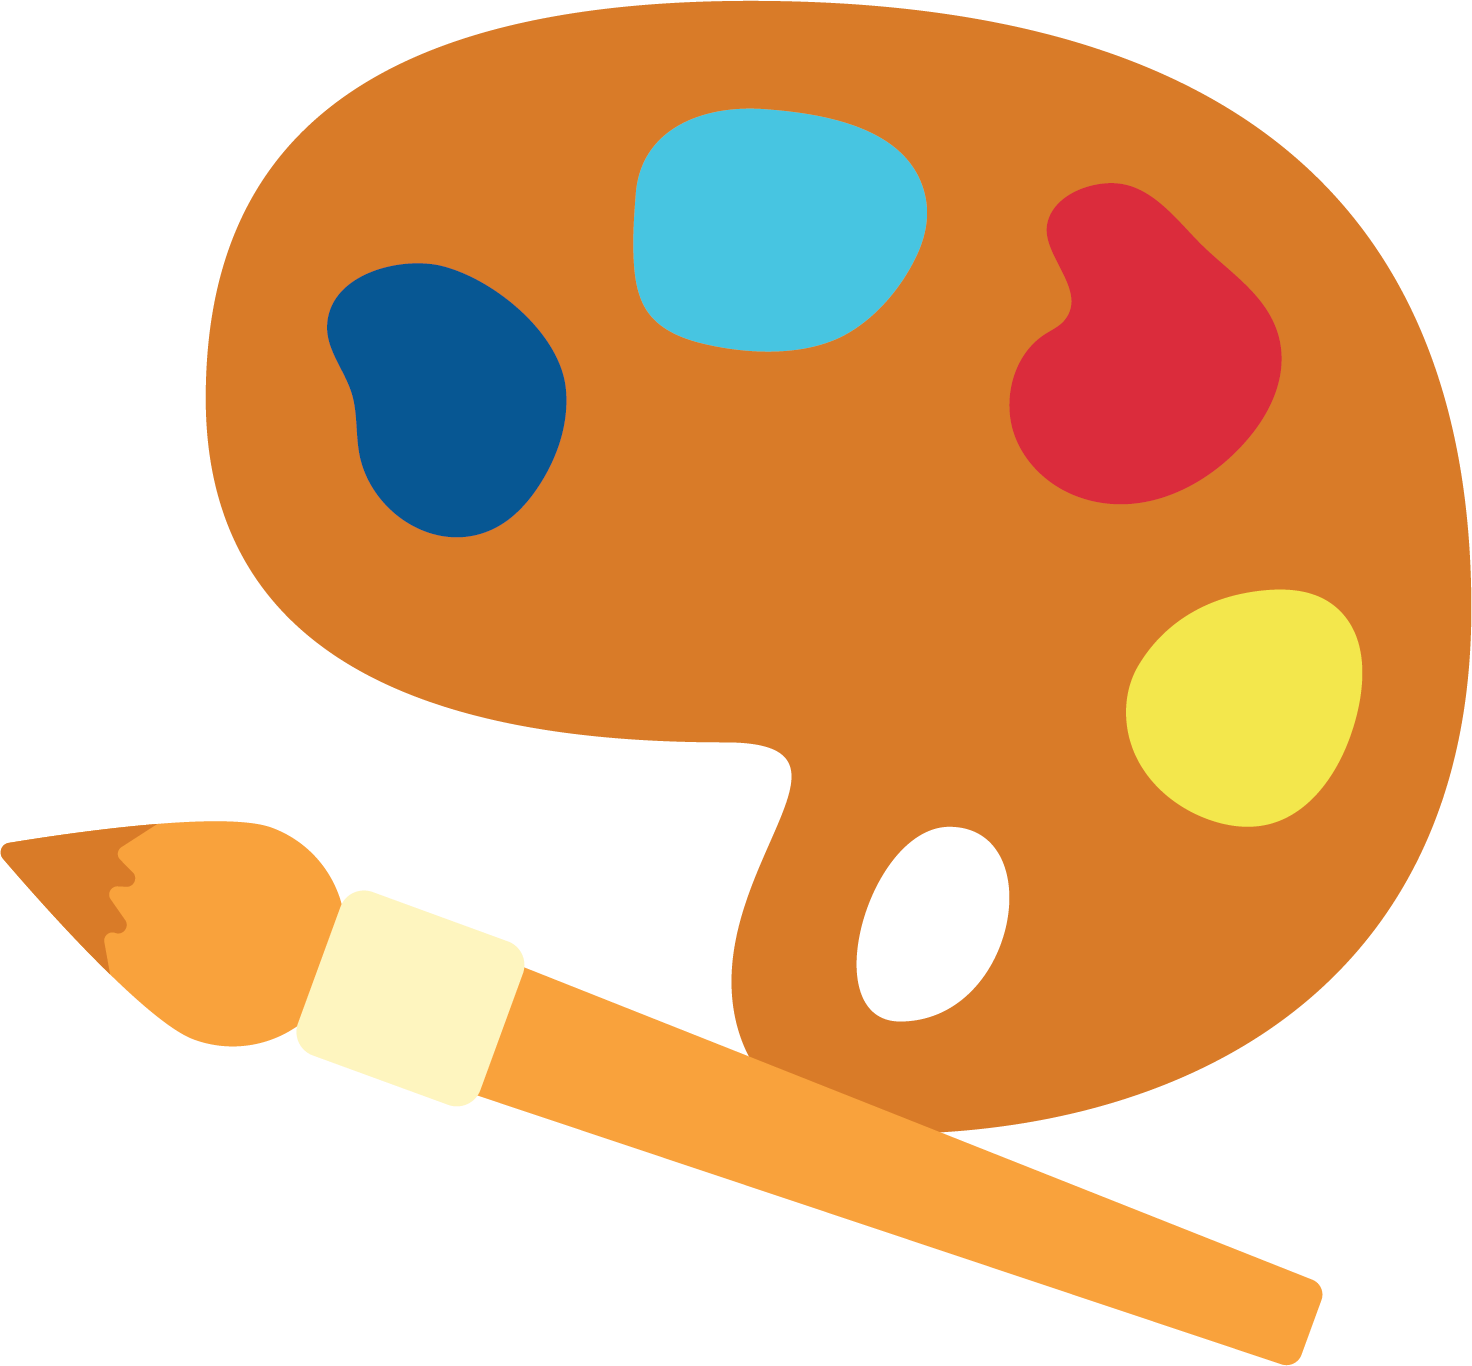 An animated paint set and paint brush. The paint colors shown are a dark blue, aqua blue, red, and yellow.